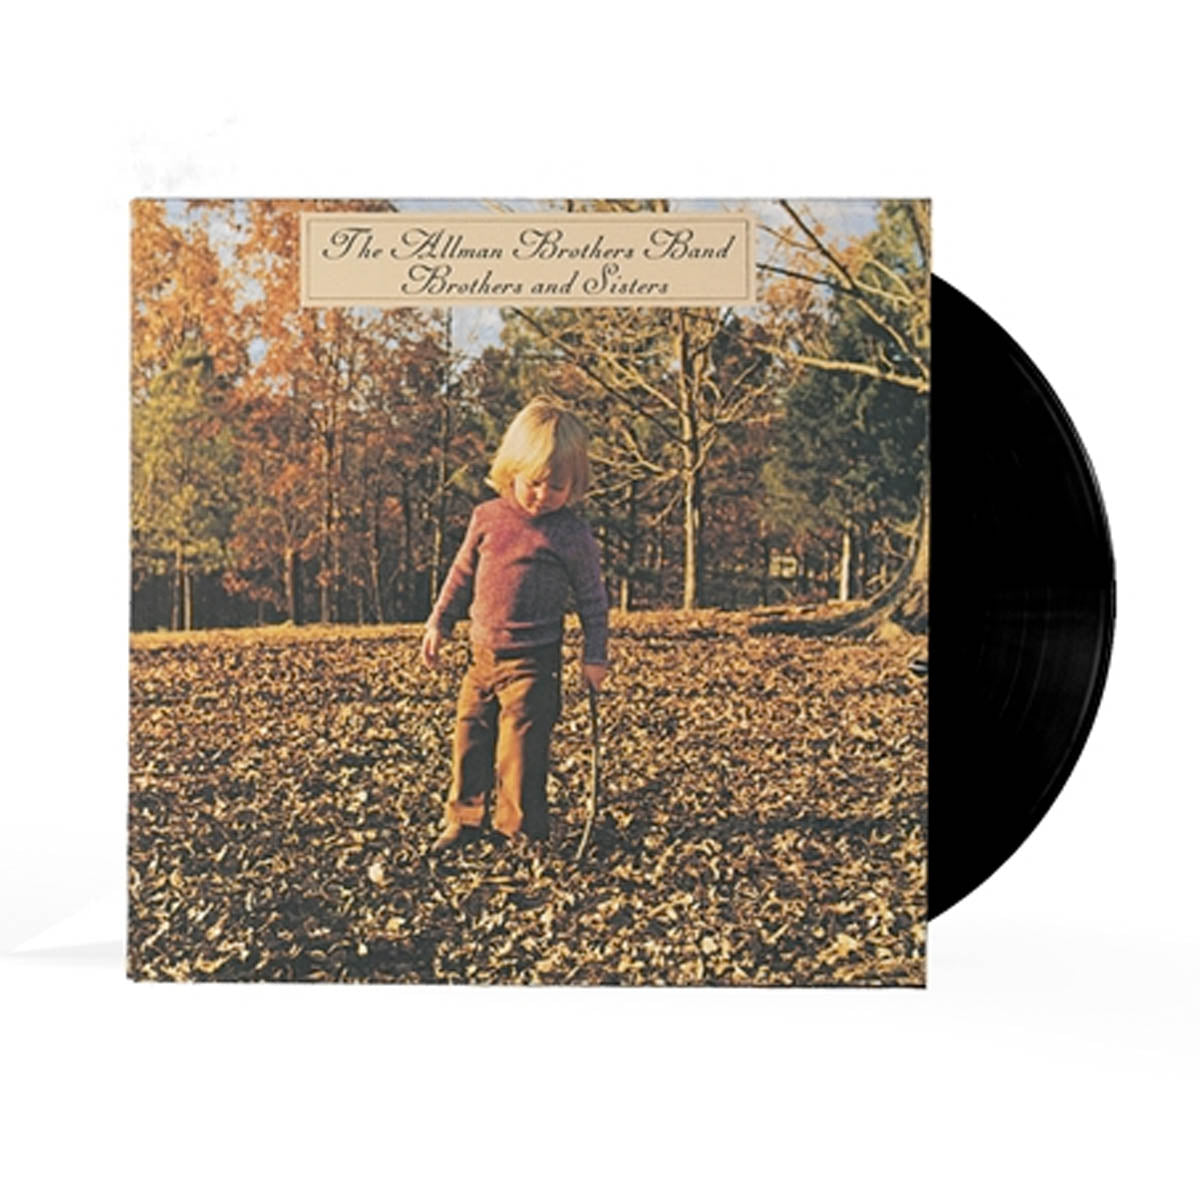 THE ALLMAN BROTHERS BAND BROTHERS AND SISTERS Vinyl